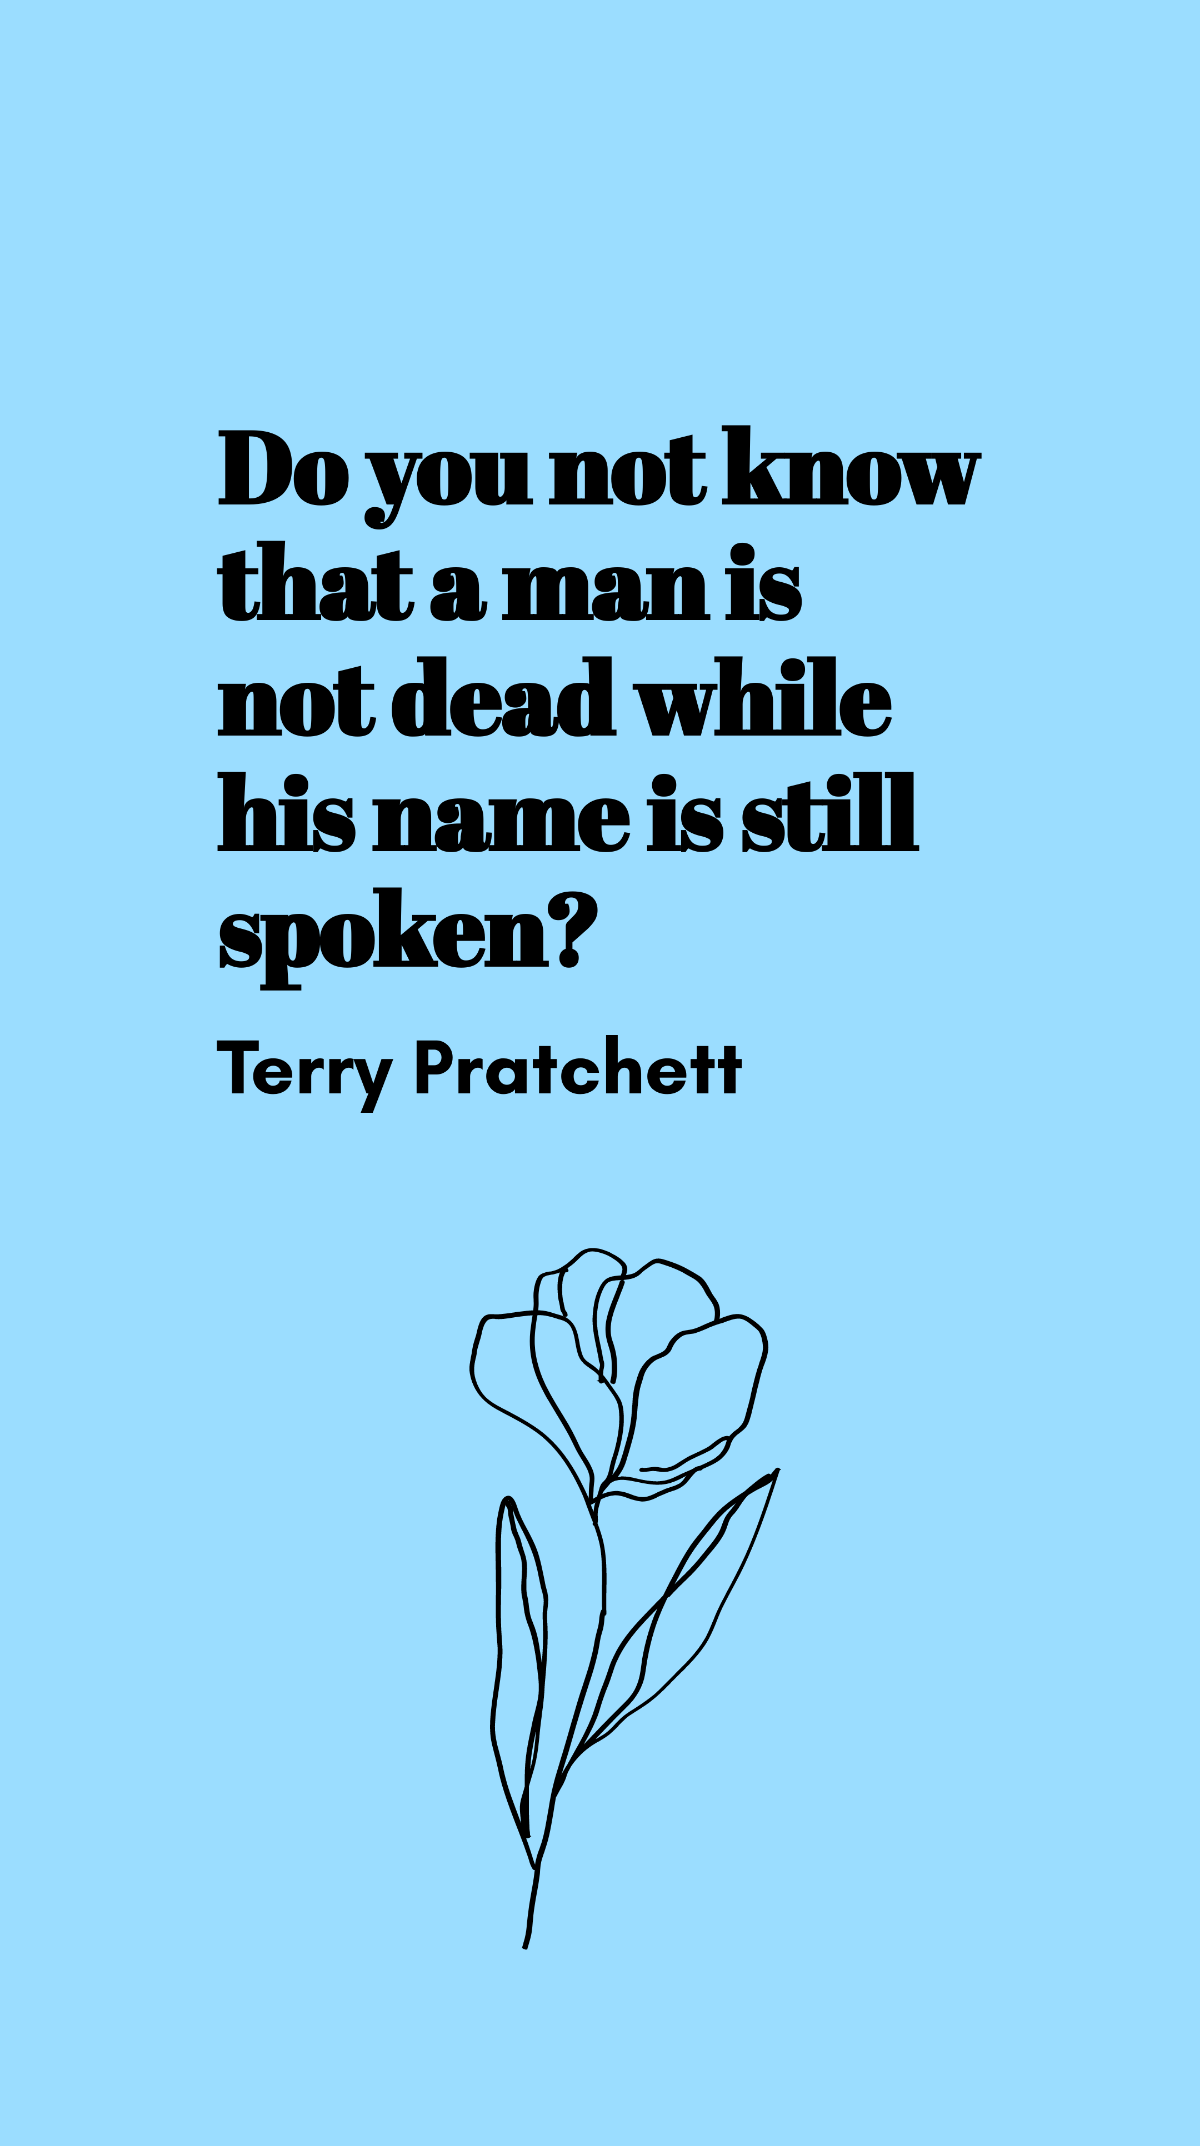 Free Terry Pratchett - Do you not know that a man is not dead while his name is still spoken? Template